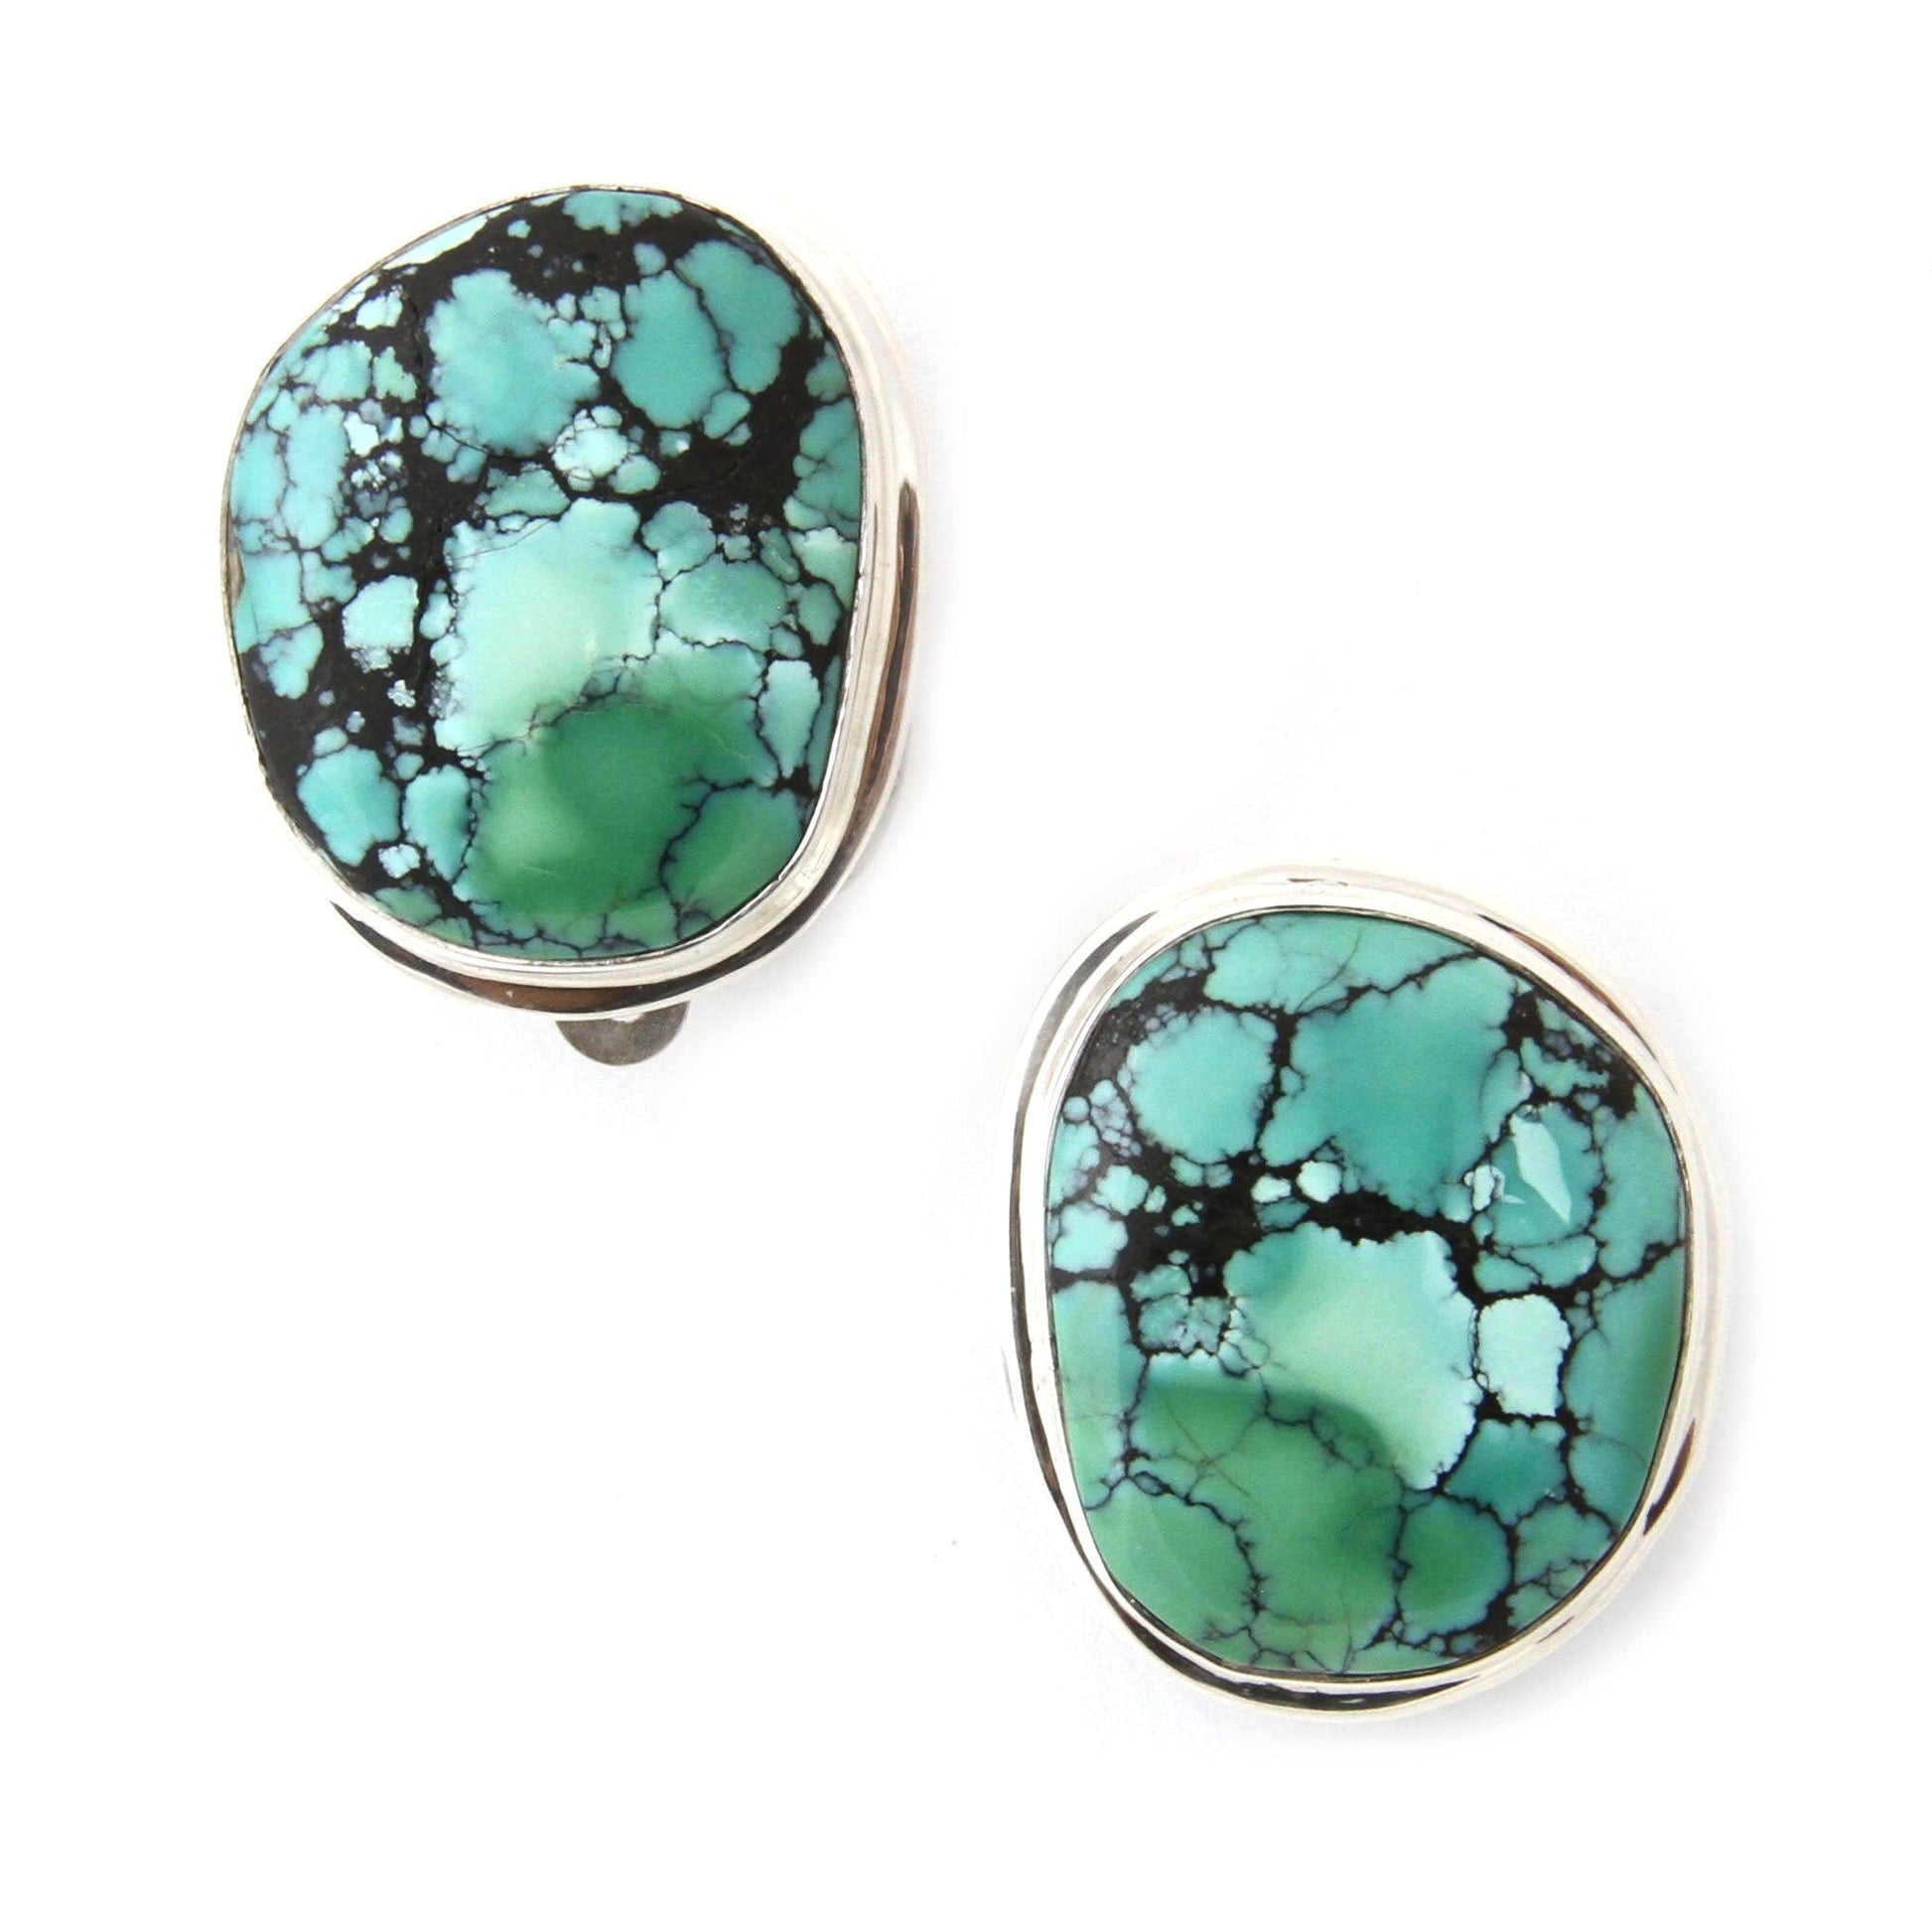 China Mountain Turquoise Clip Earrings-jewelry-Pam Springall-Sorrel Sky Gallery